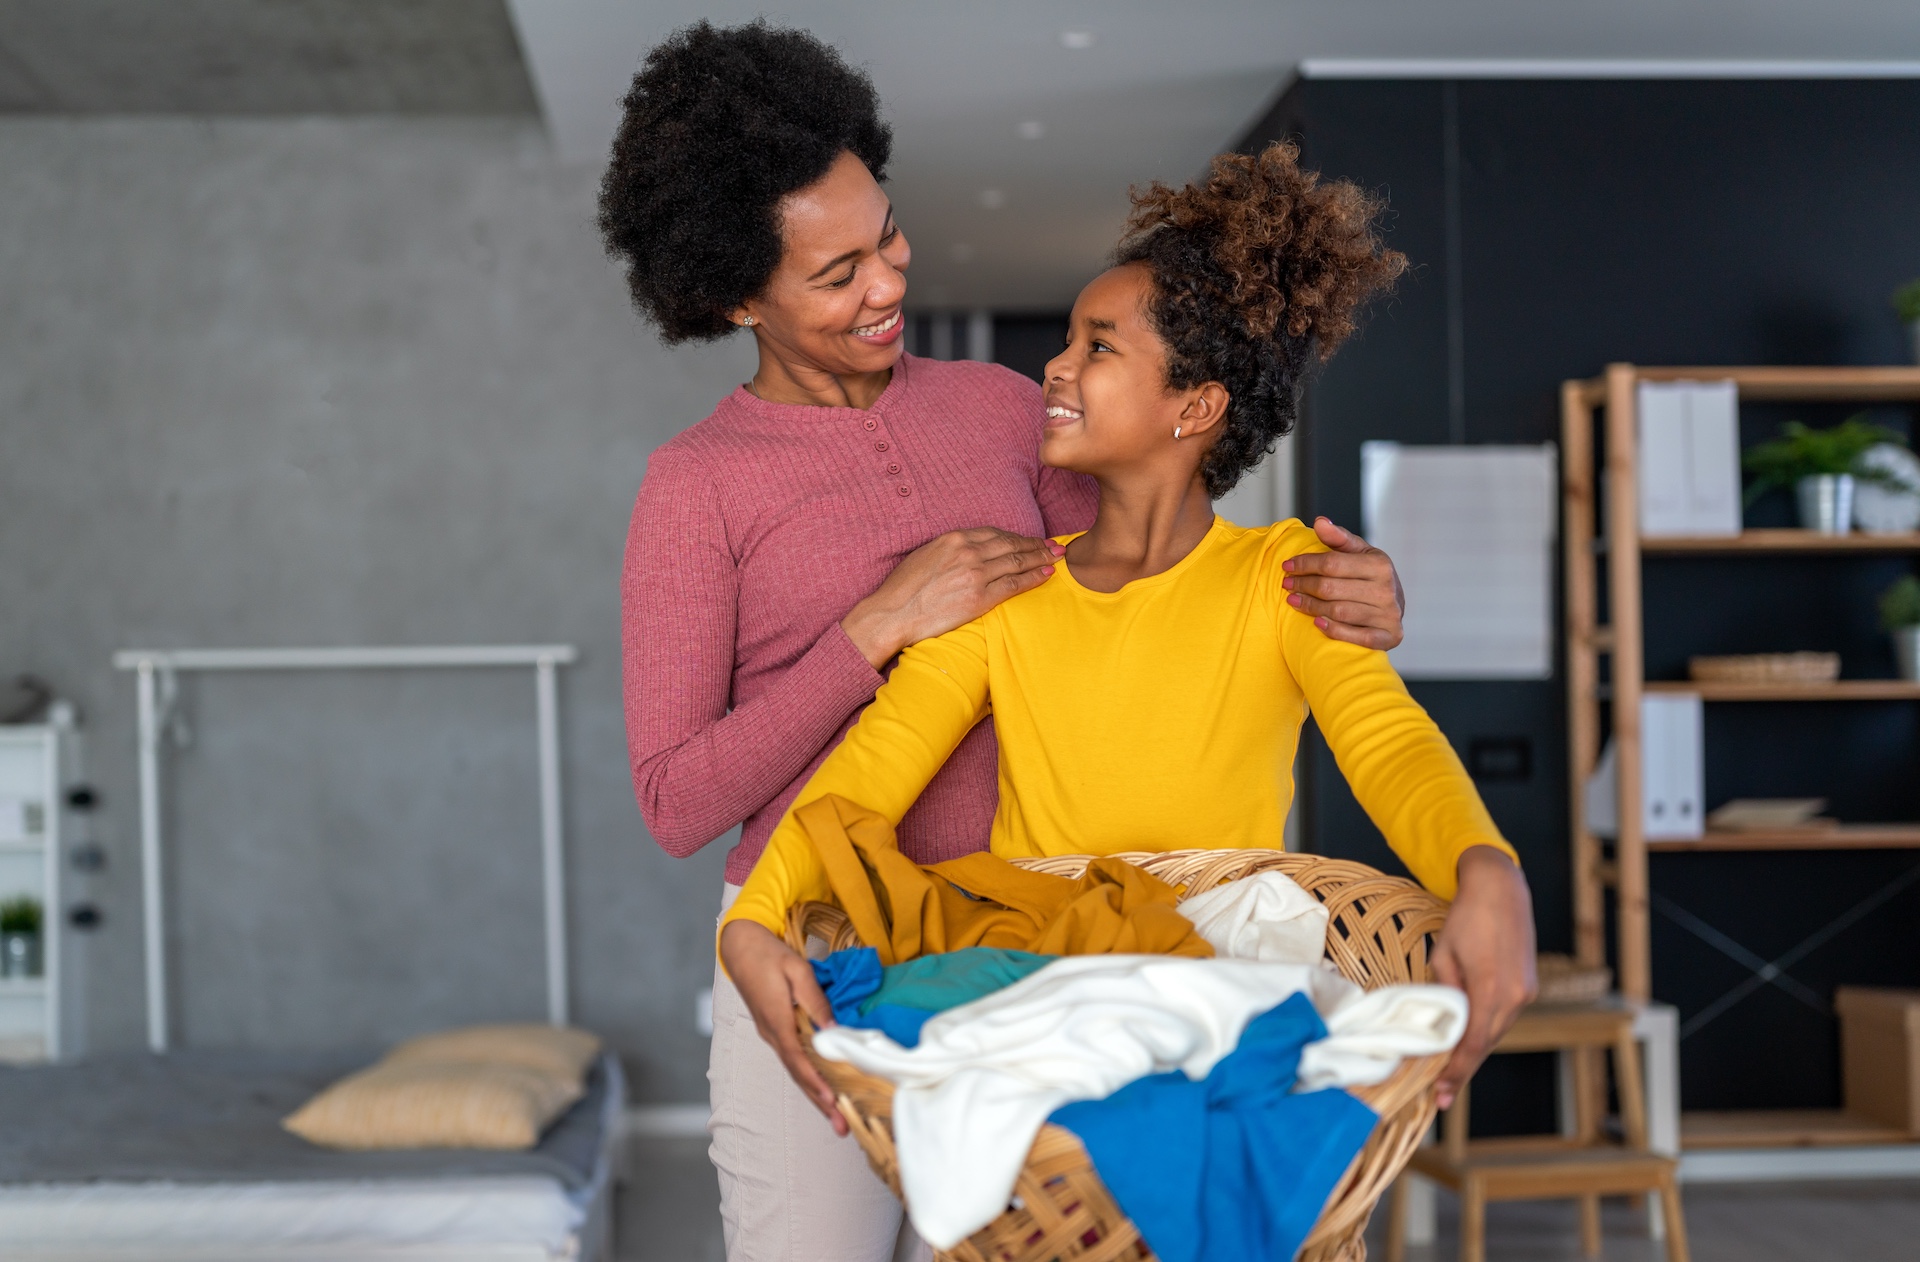 Mother and daughter smiling at each other while holding a basket of laundry, emphasizing teamwork and responsibility to foster independence in kids.